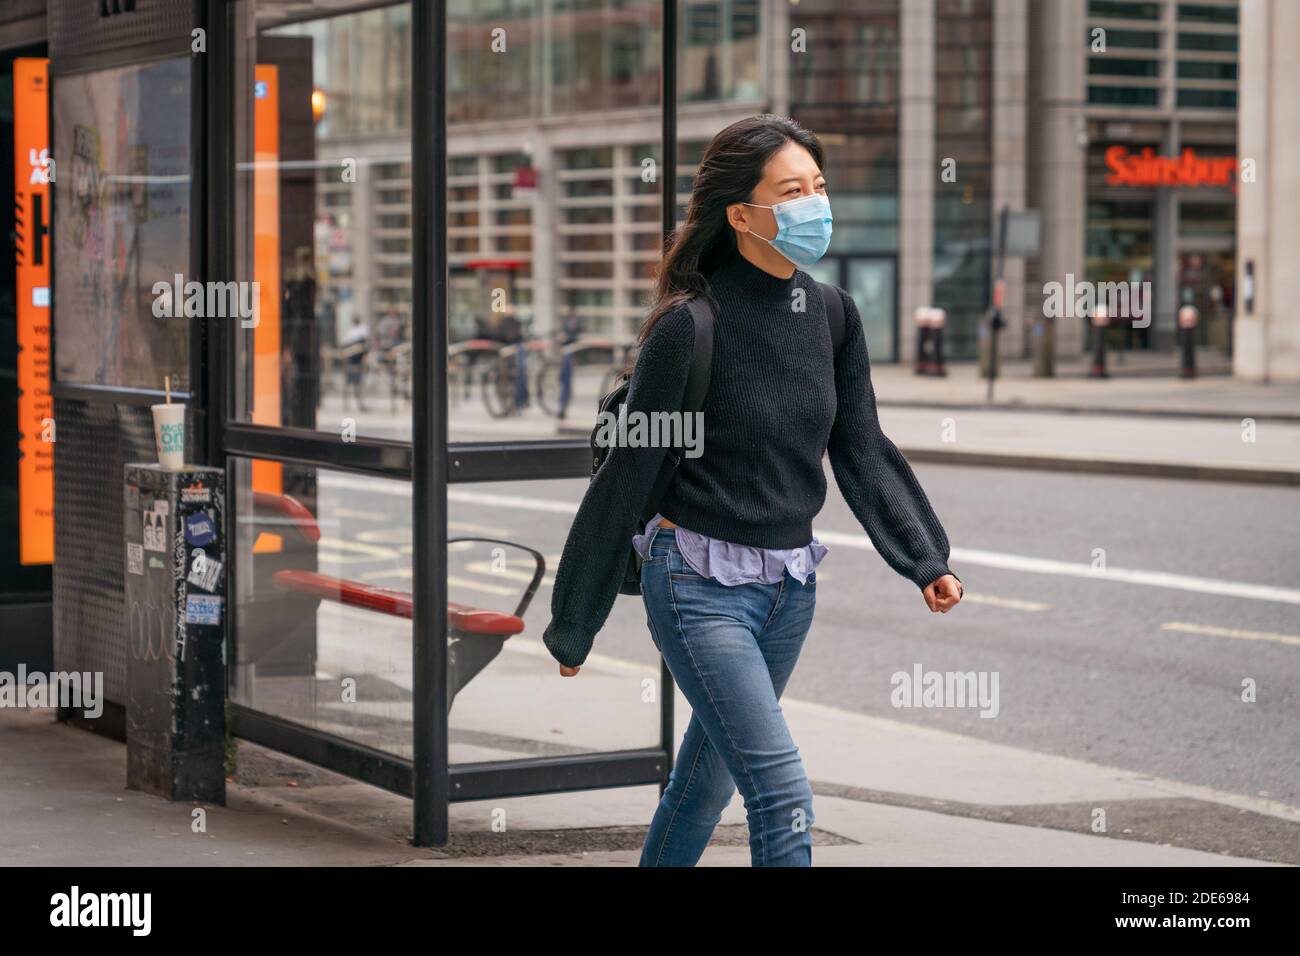 LONDON, ENGLAND - October 23, 2020 - Beautiful chic young smiling oriental woman with long hair walking on High Holborn in London wearing a face mask Stock Photo